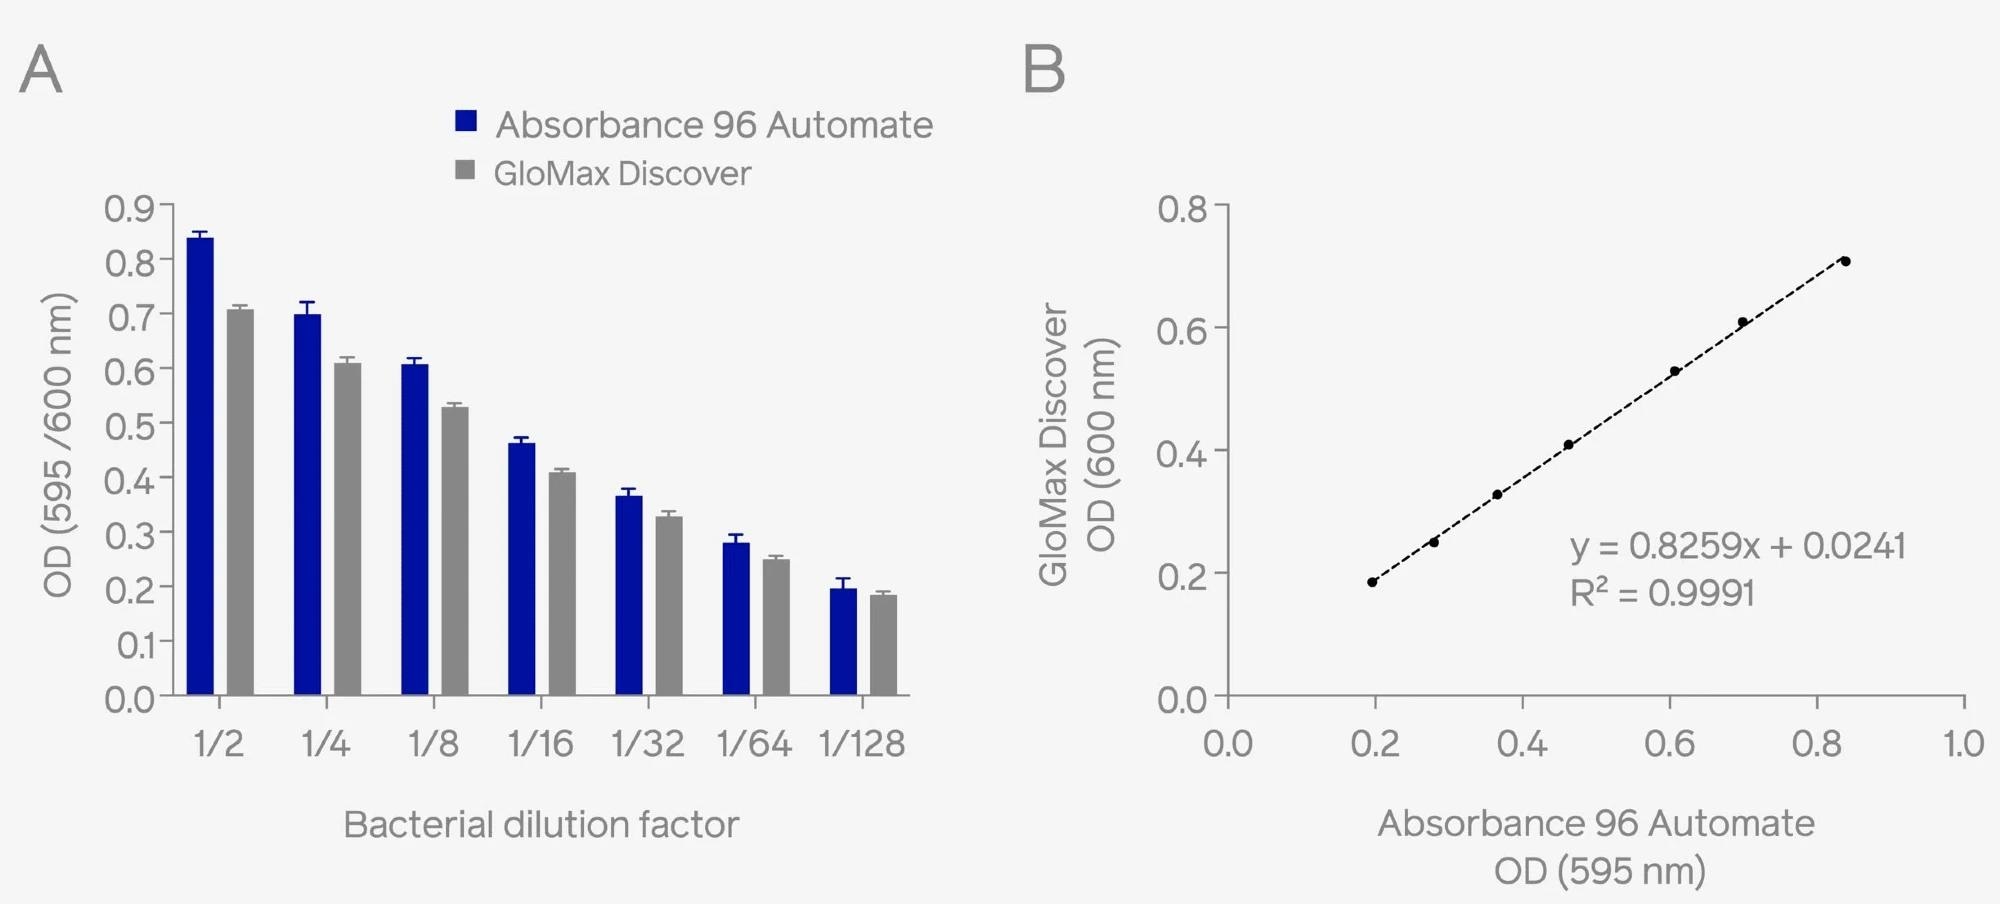 Different bacterial samples were prepared, and absorbance was measured either at 595 nm using Absorbance 96 Automate or at 600 nm with GloMax® Discover (A). A high readout correlation was observed between both devices (B), suggesting identical reproducibility, sensitivity, and linearity across the dynamic range. Image Credit: Byonoy GmbH